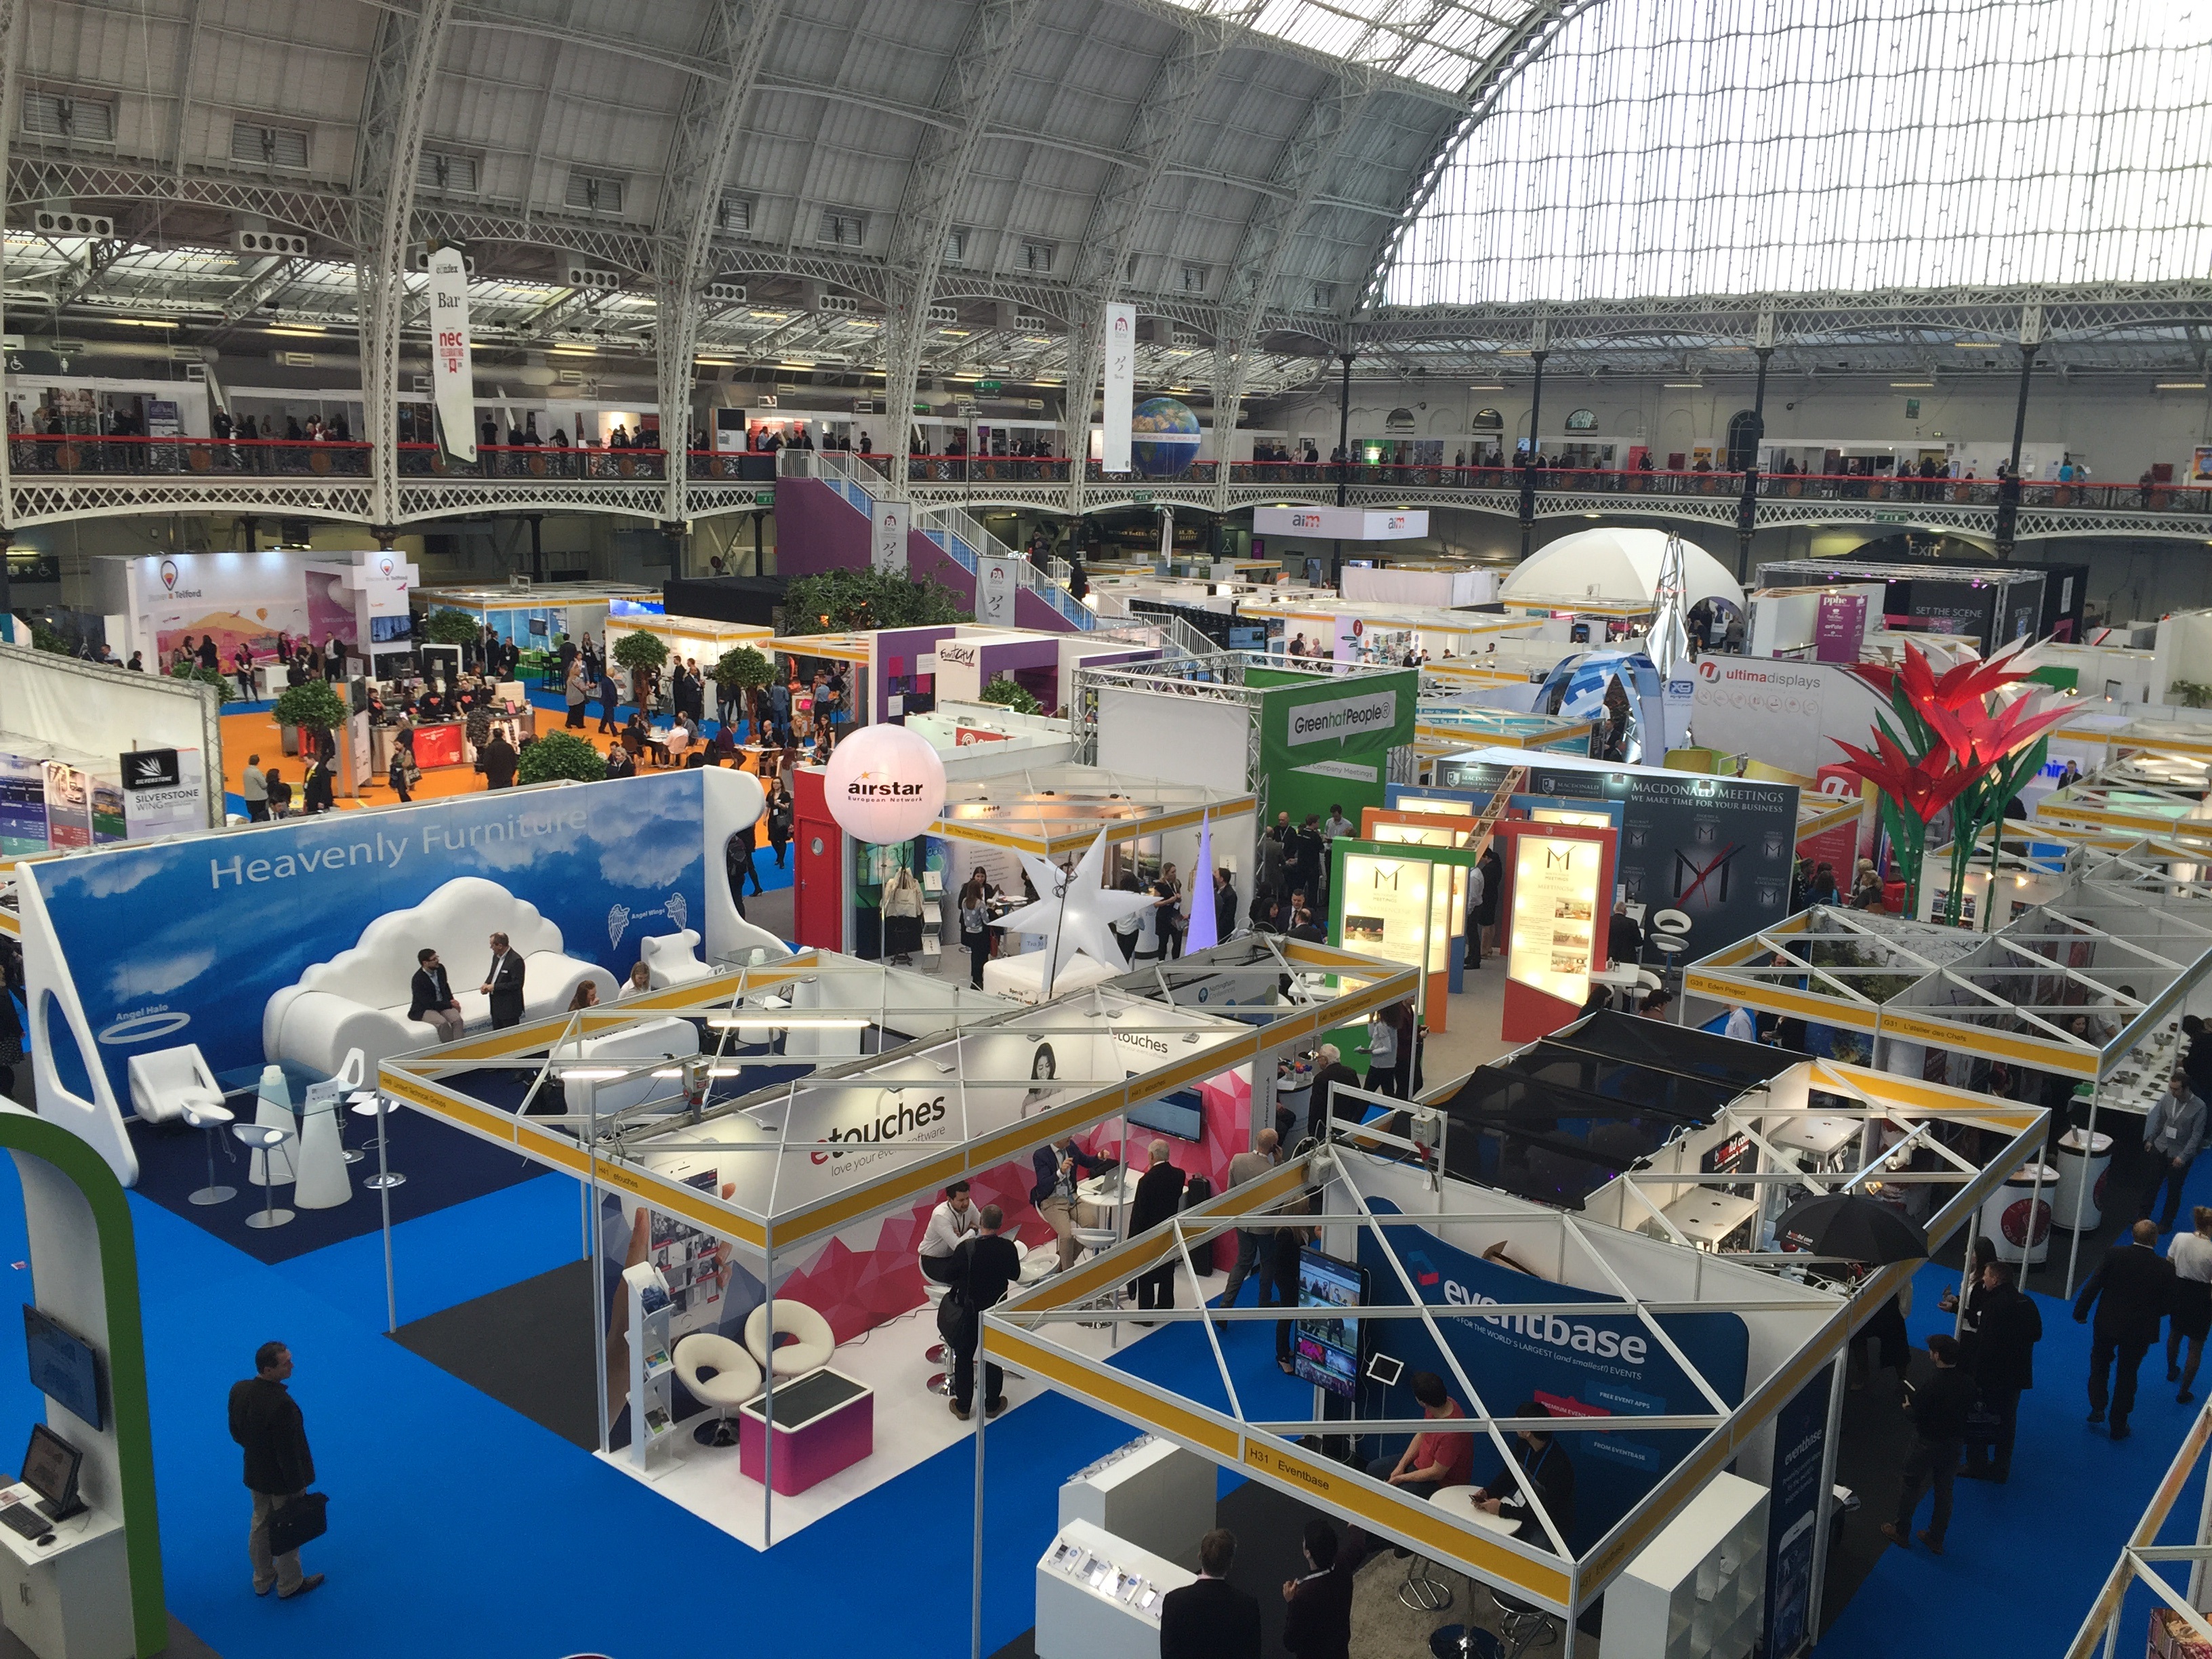 The confex show at London Olympia